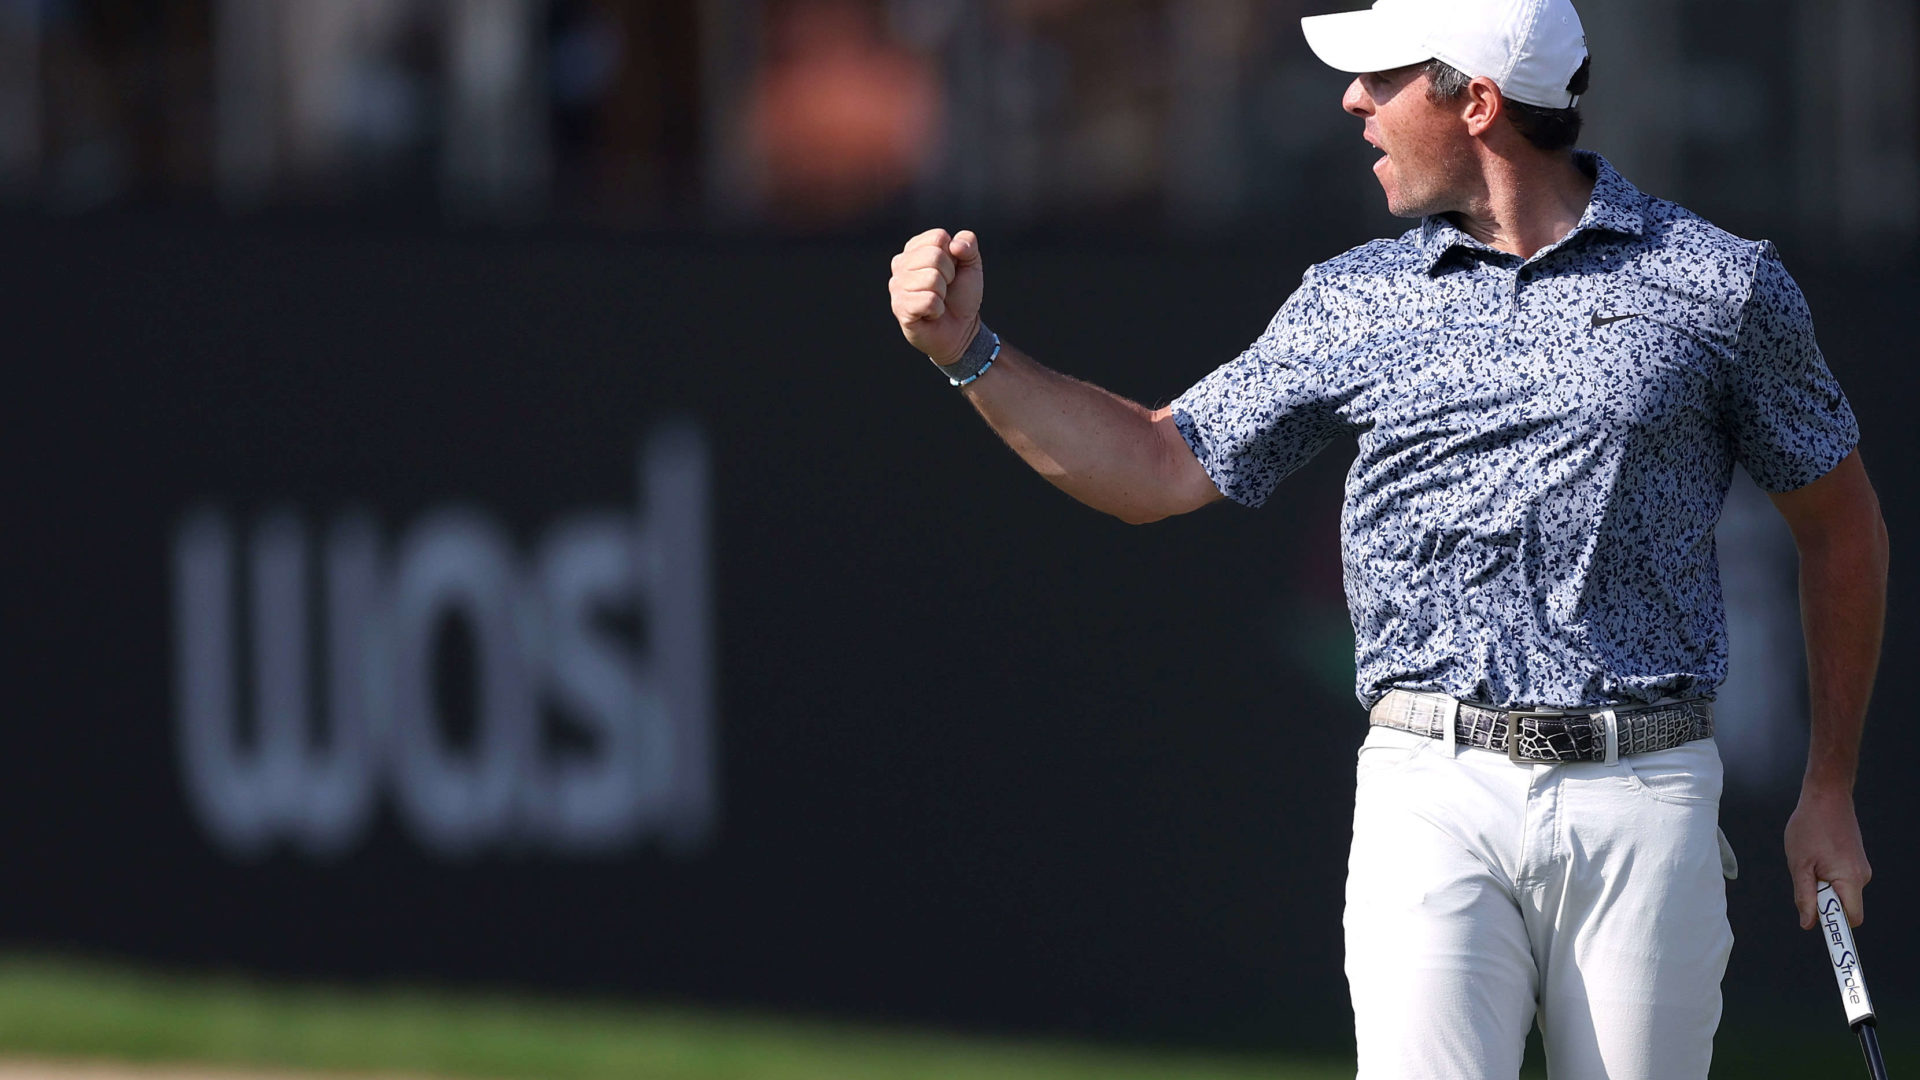 DUBAI, UNITED ARAB EMIRATES - JANUARY 30: Rory McIlroy of Northern Ireland celebrates victory in the Final Round on Day Five of the Hero Dubai Desert Classic at Emirates Golf Club on January 30, 2023 in Dubai, United Arab Emirates. tour news (Photo by Oisin Keniry/Getty Images)